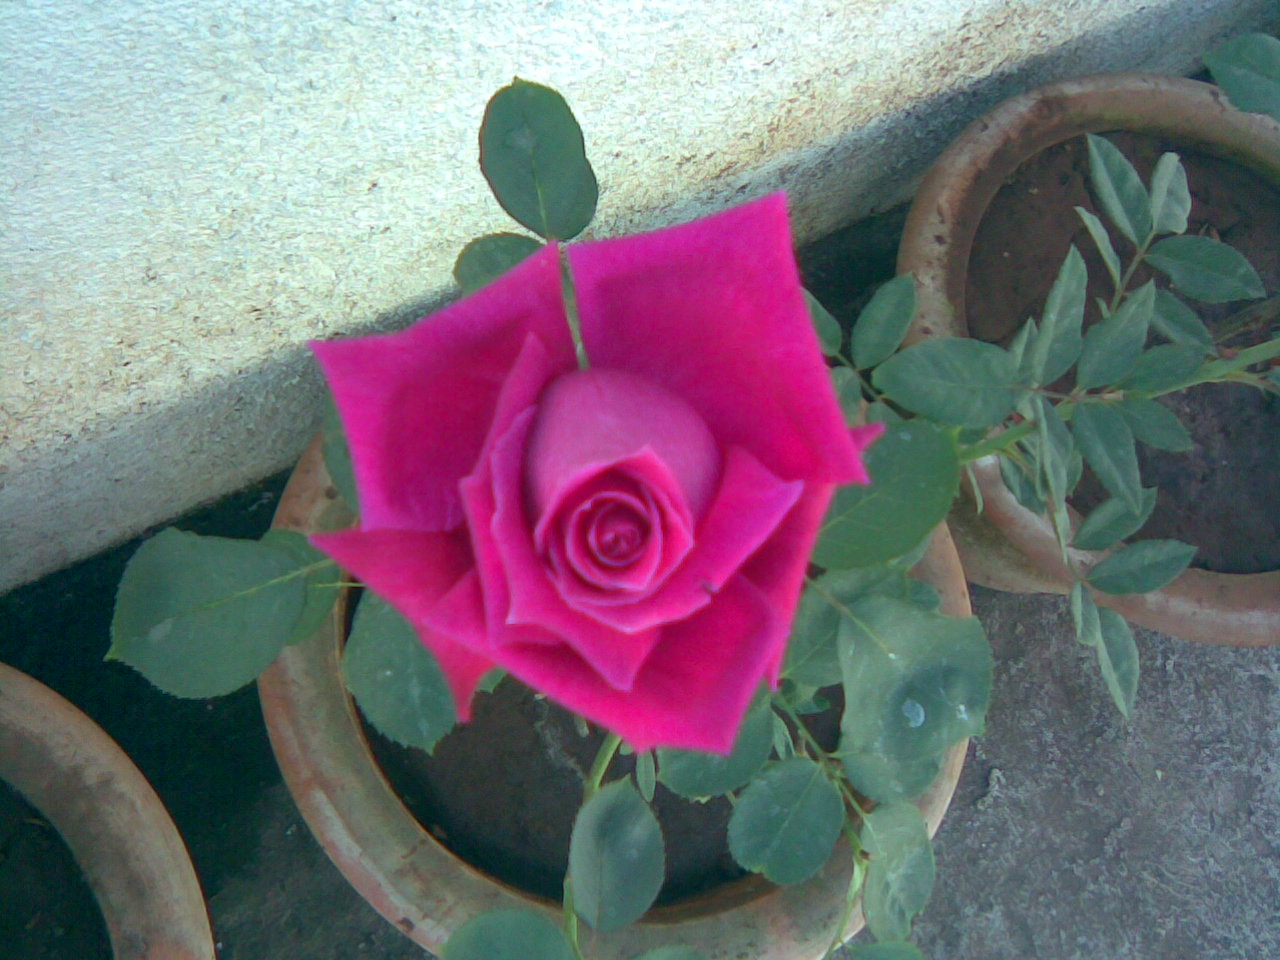 ... picture+of+rose+free+rose+wallpapers+and+images+free+flower+images.jpg